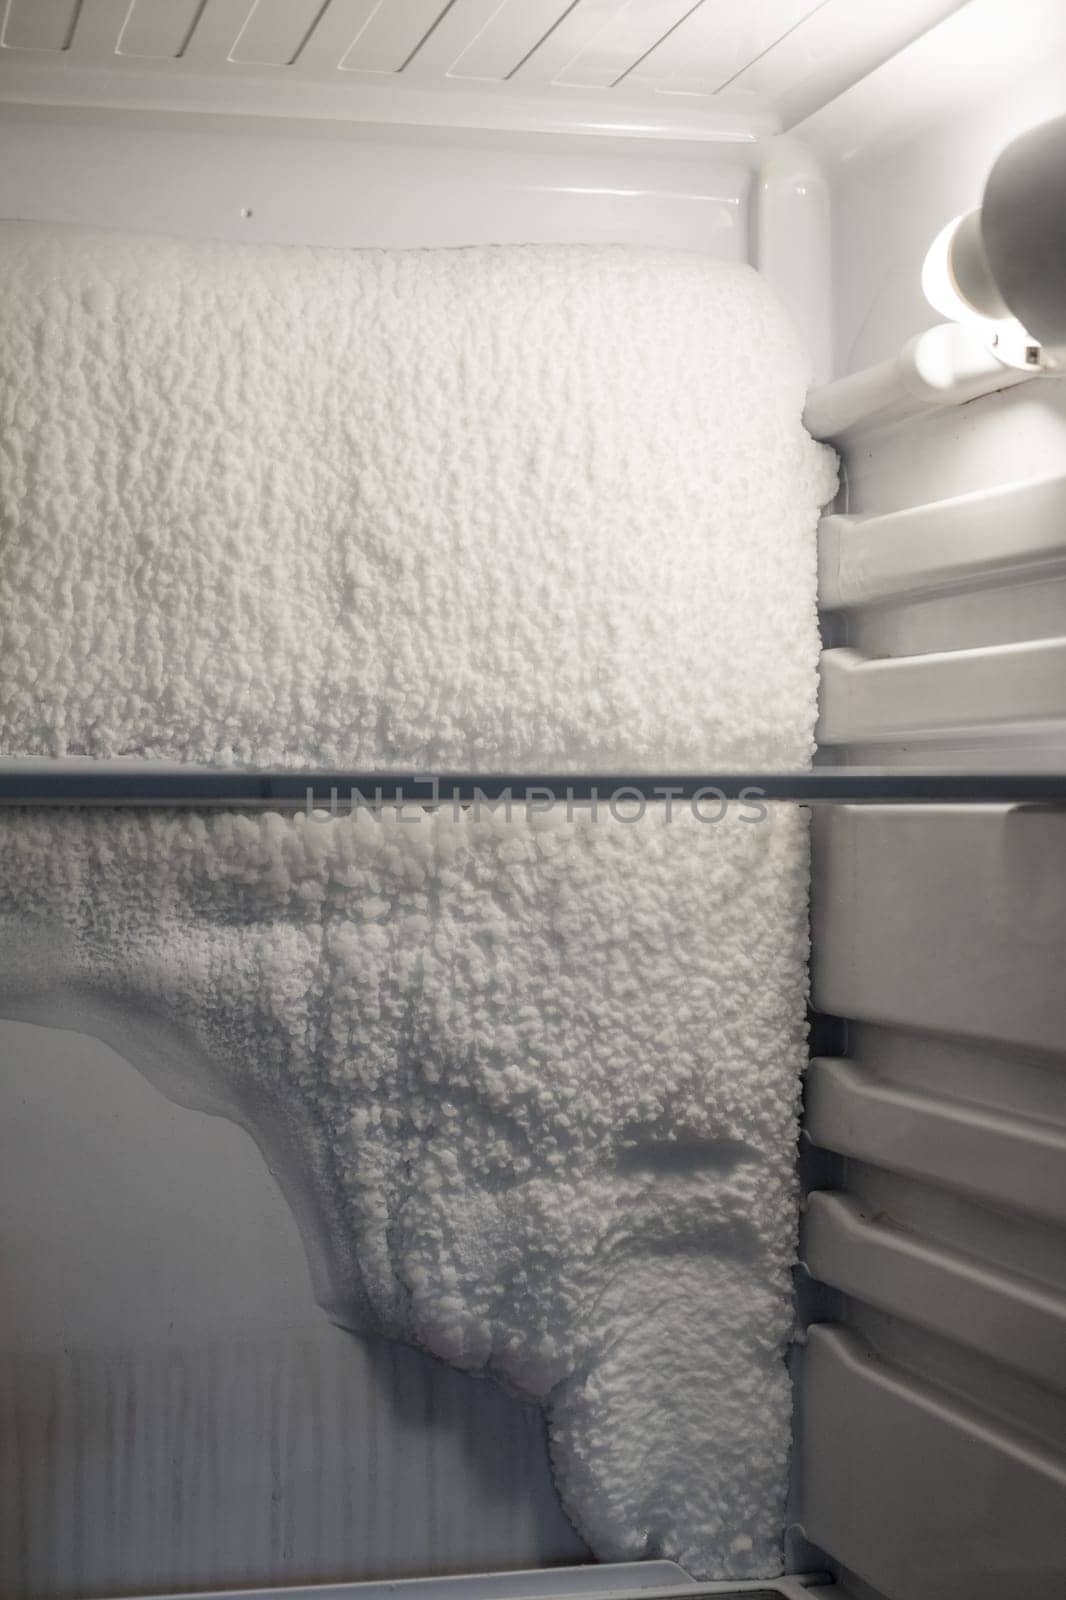 Frozen refrigerator that needs to be defrosted. by AnatoliiFoto